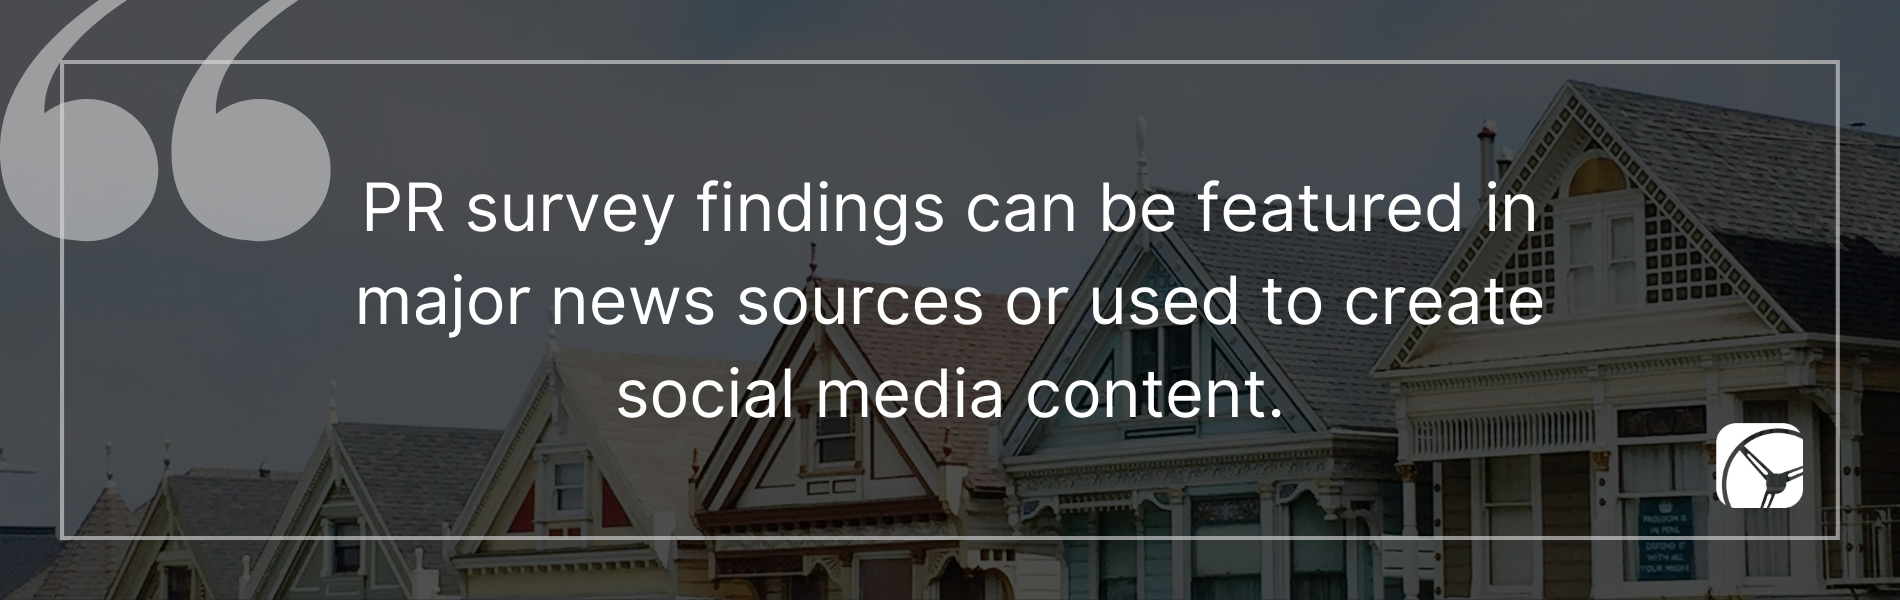 Market research findings can be featured in major news sources or used to create social media content.